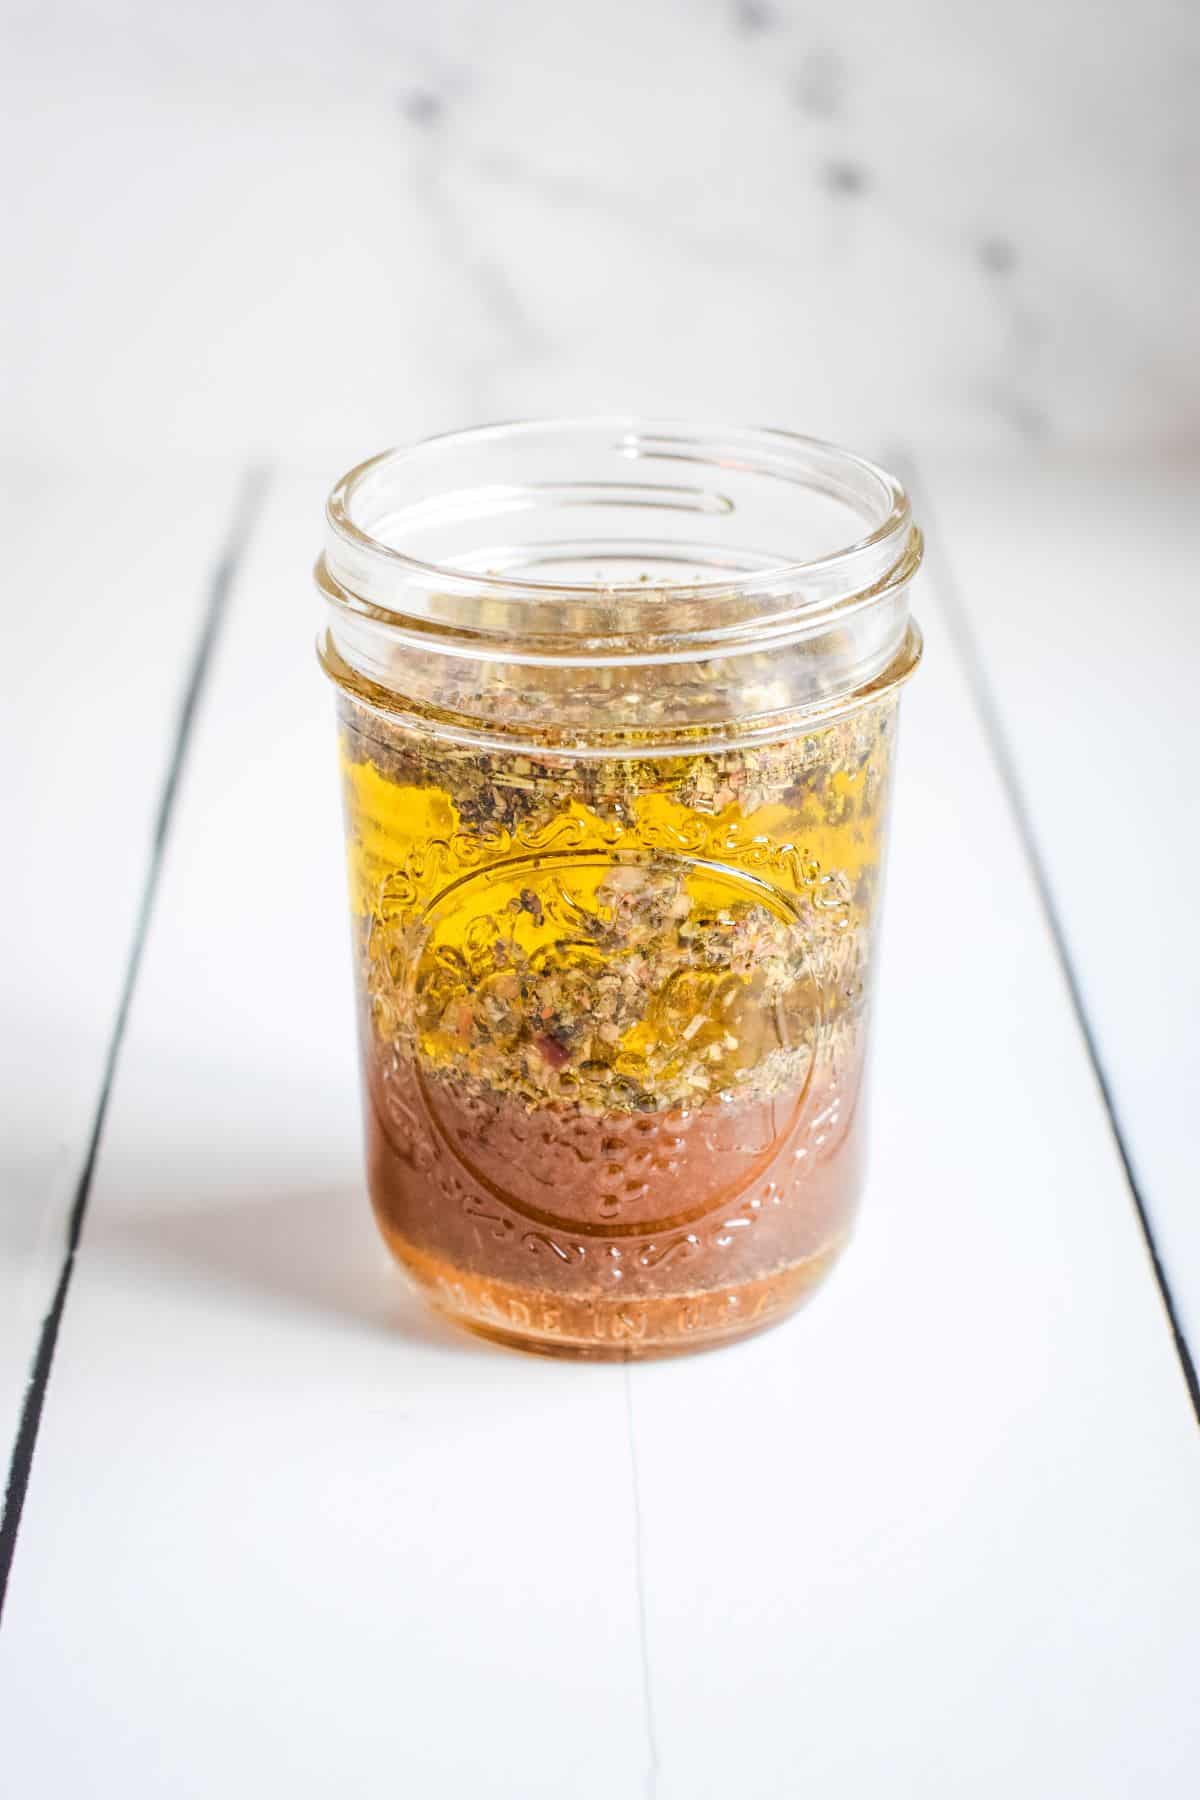 Oil and spices in a Mason jar for salad dressing.